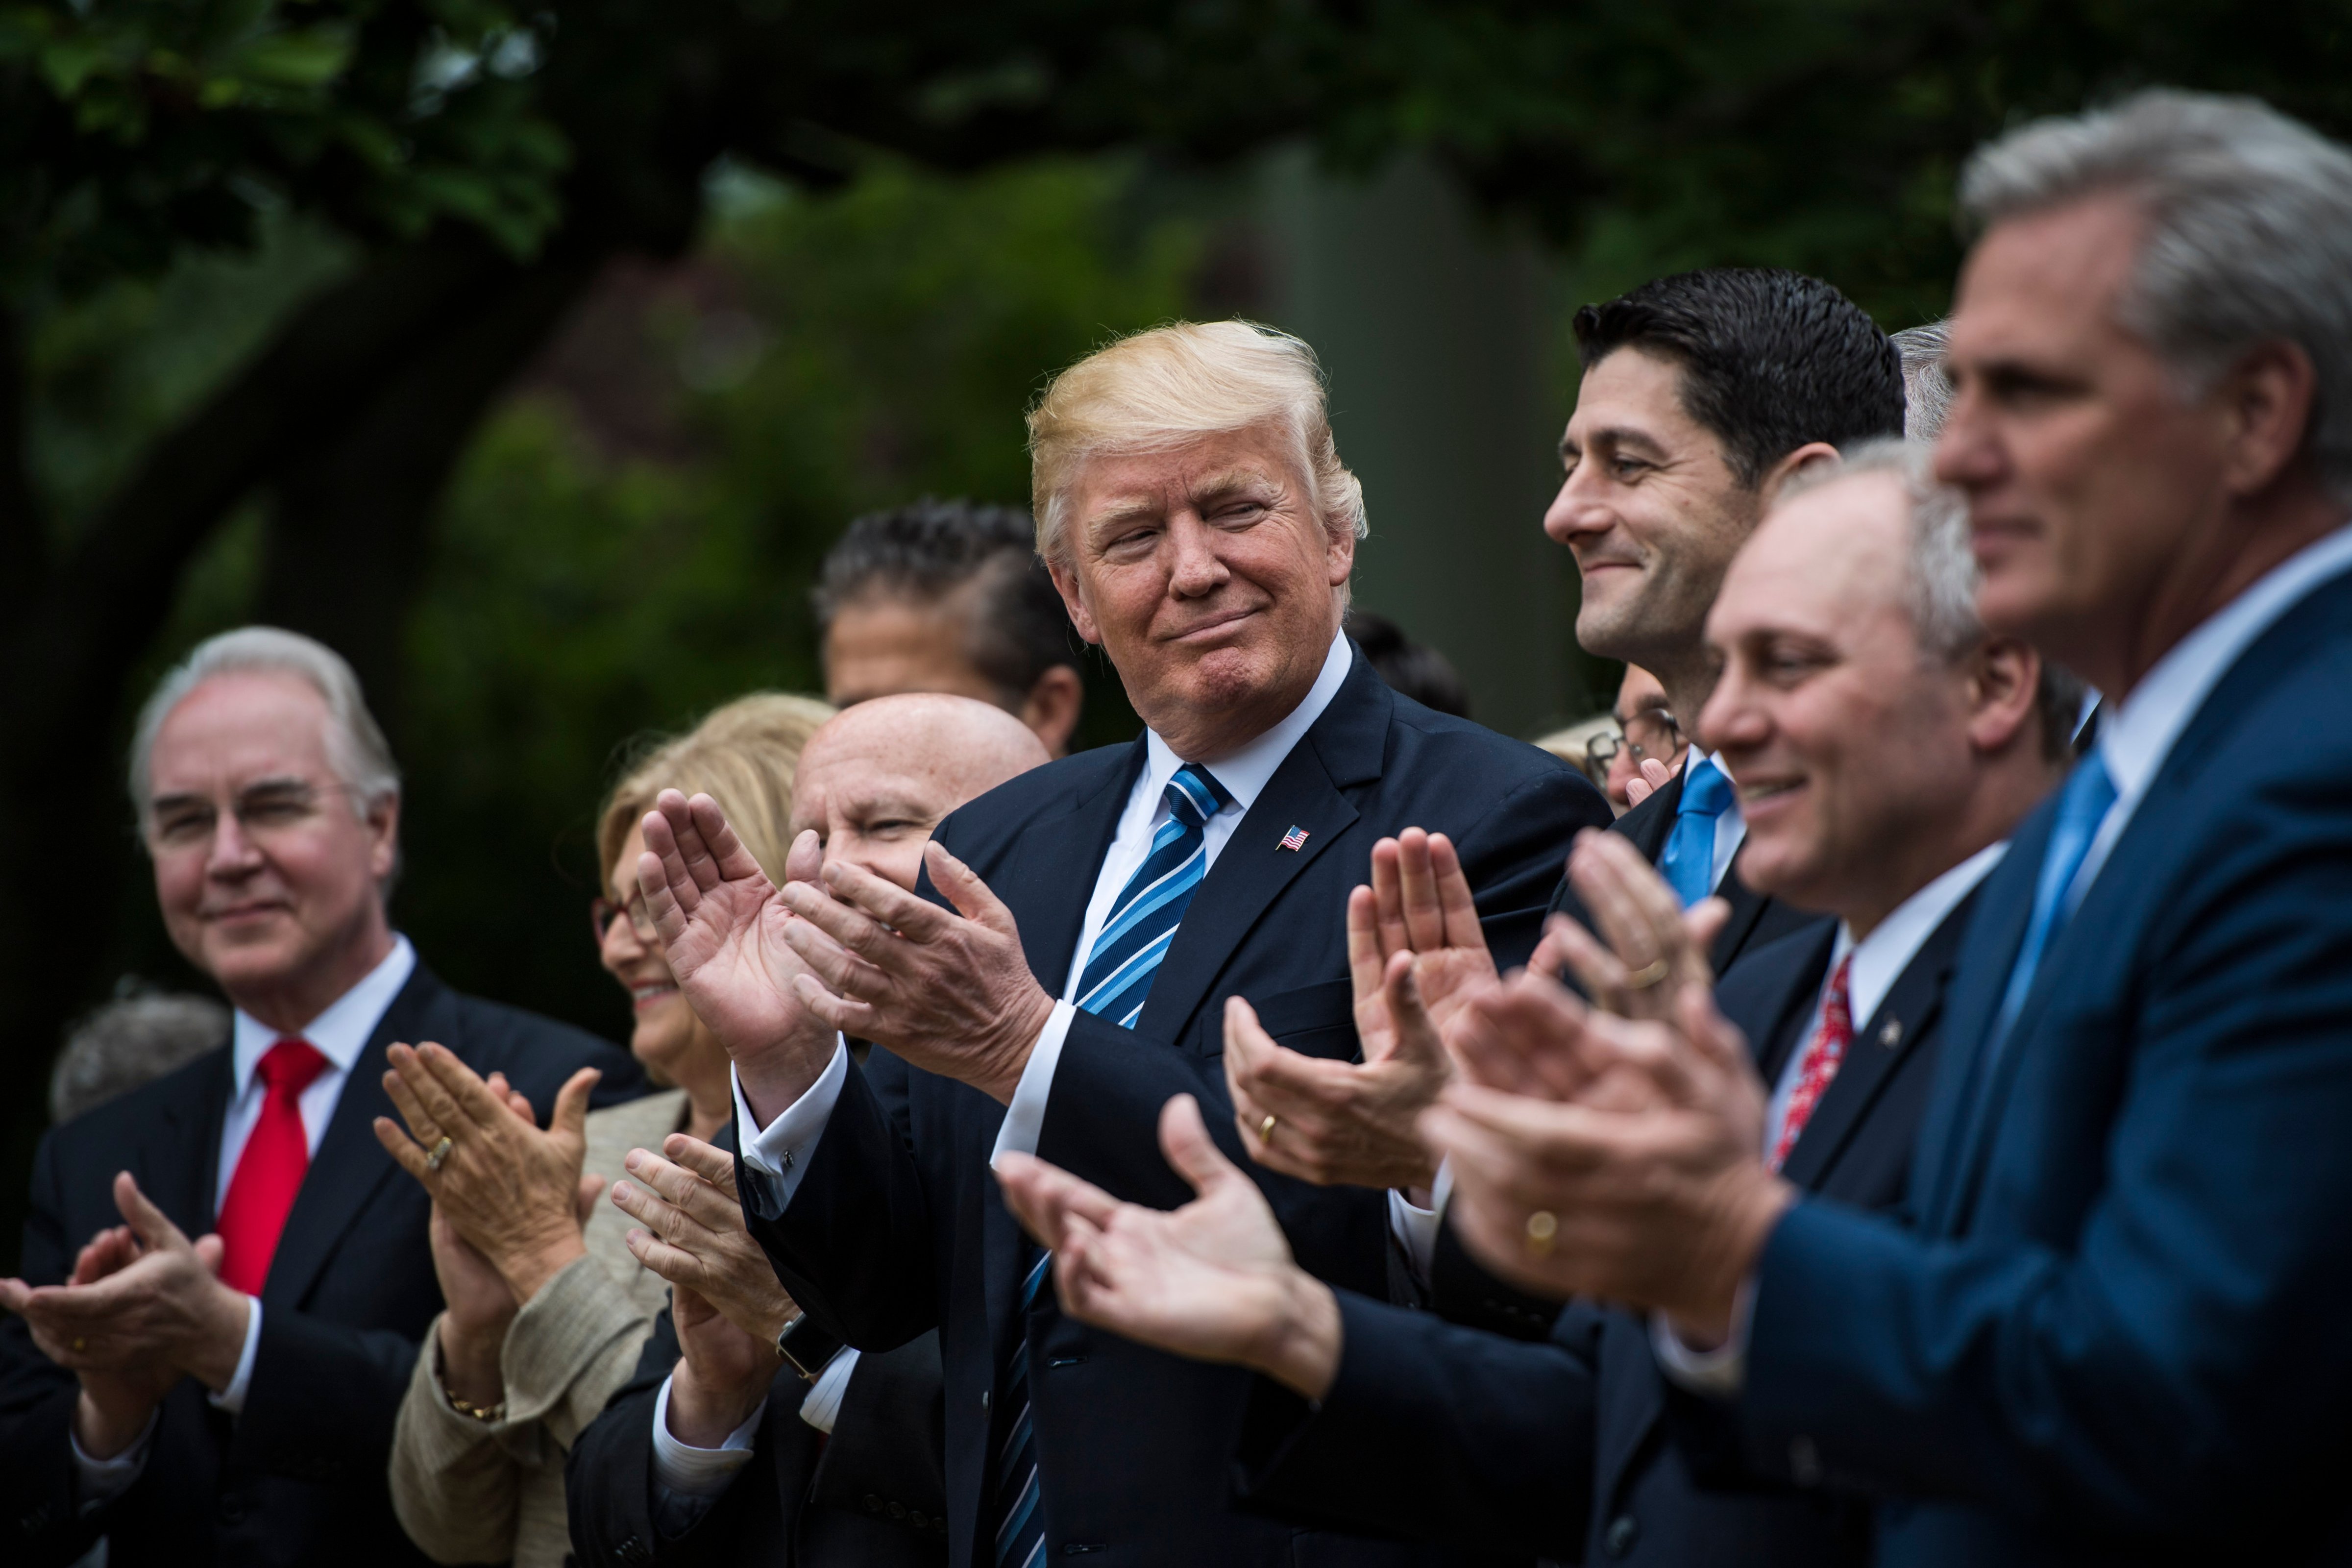 President Donald Trump looks to House Speaker Paul Ryan of Wis., and other House congressmen in the Rose Garden after the House pushed through a health care bill, at the White House in Washington, D.C. on May 04, 2017. (Jabin Botsford—The Washington Post/Getty Images)